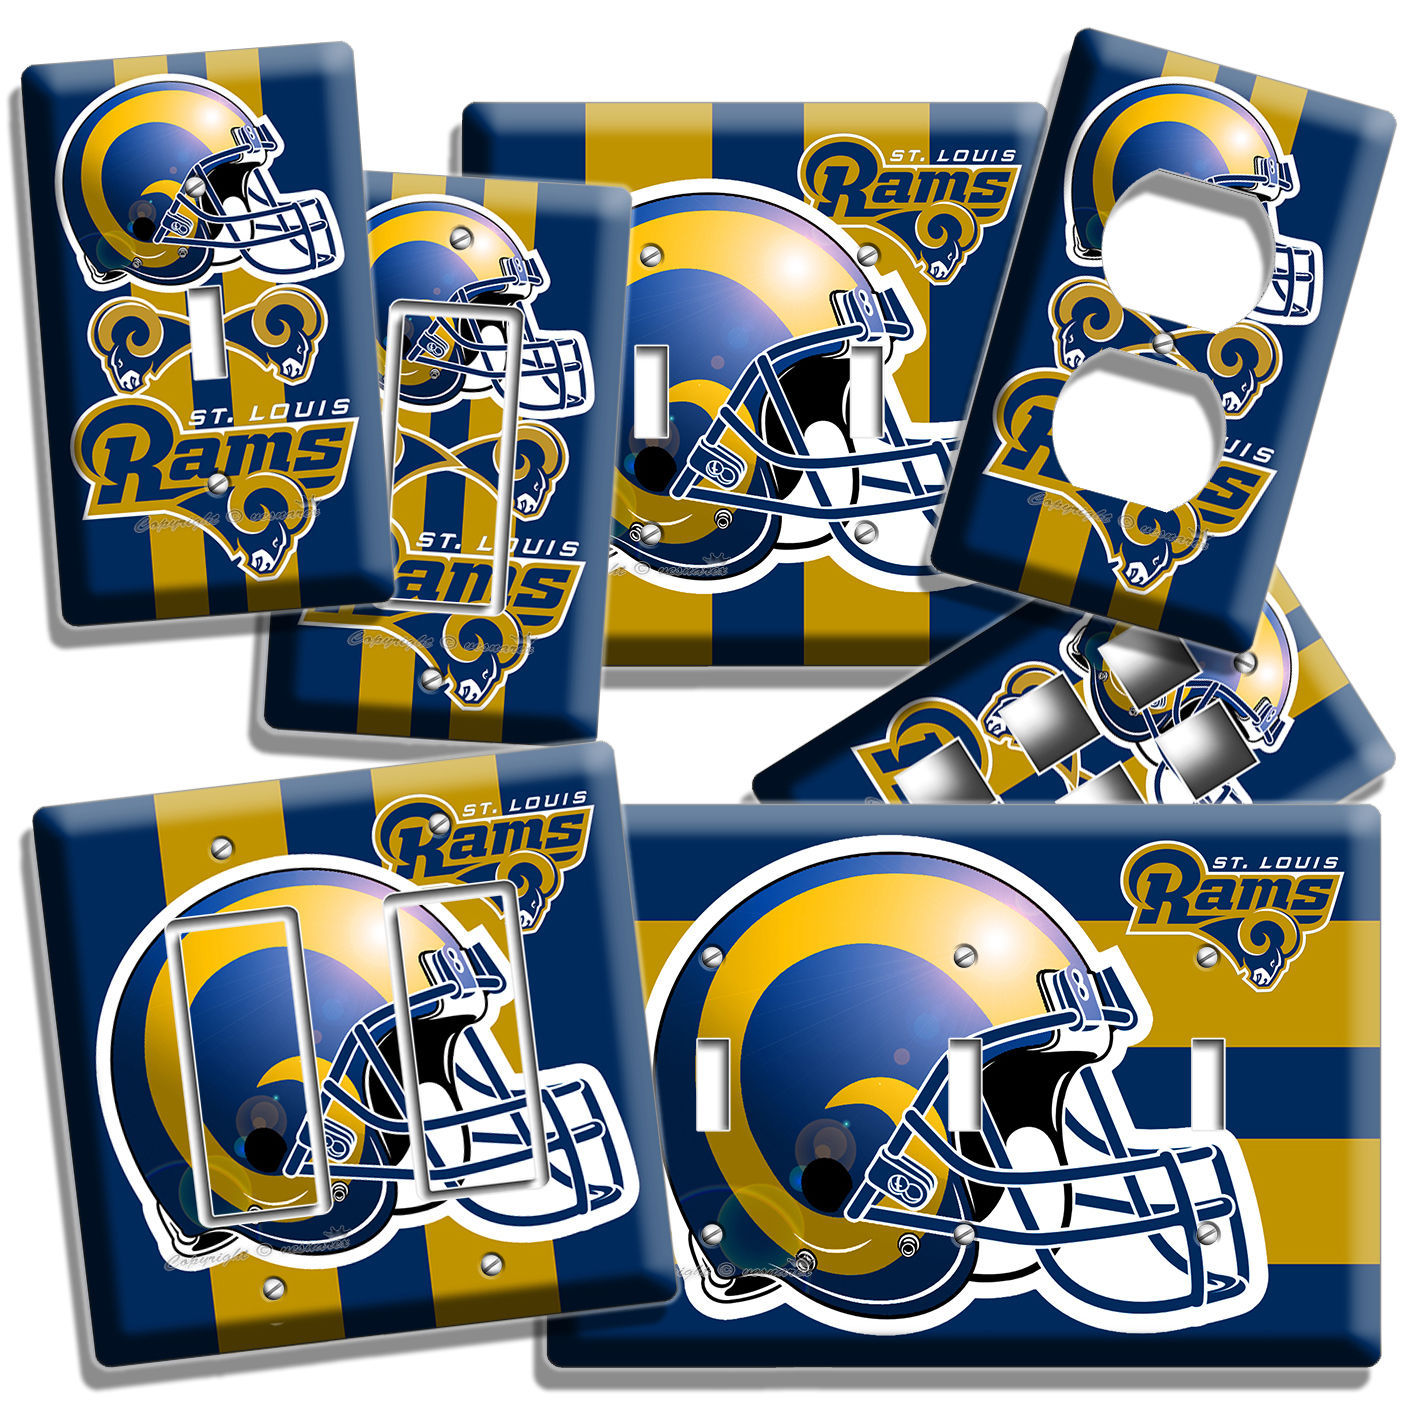 ST LOUIS RAMS NFL TEAM LIGHT SWITCH WALL PLATE OUTLET BOYS ROOM MAN CAVE GARAGE